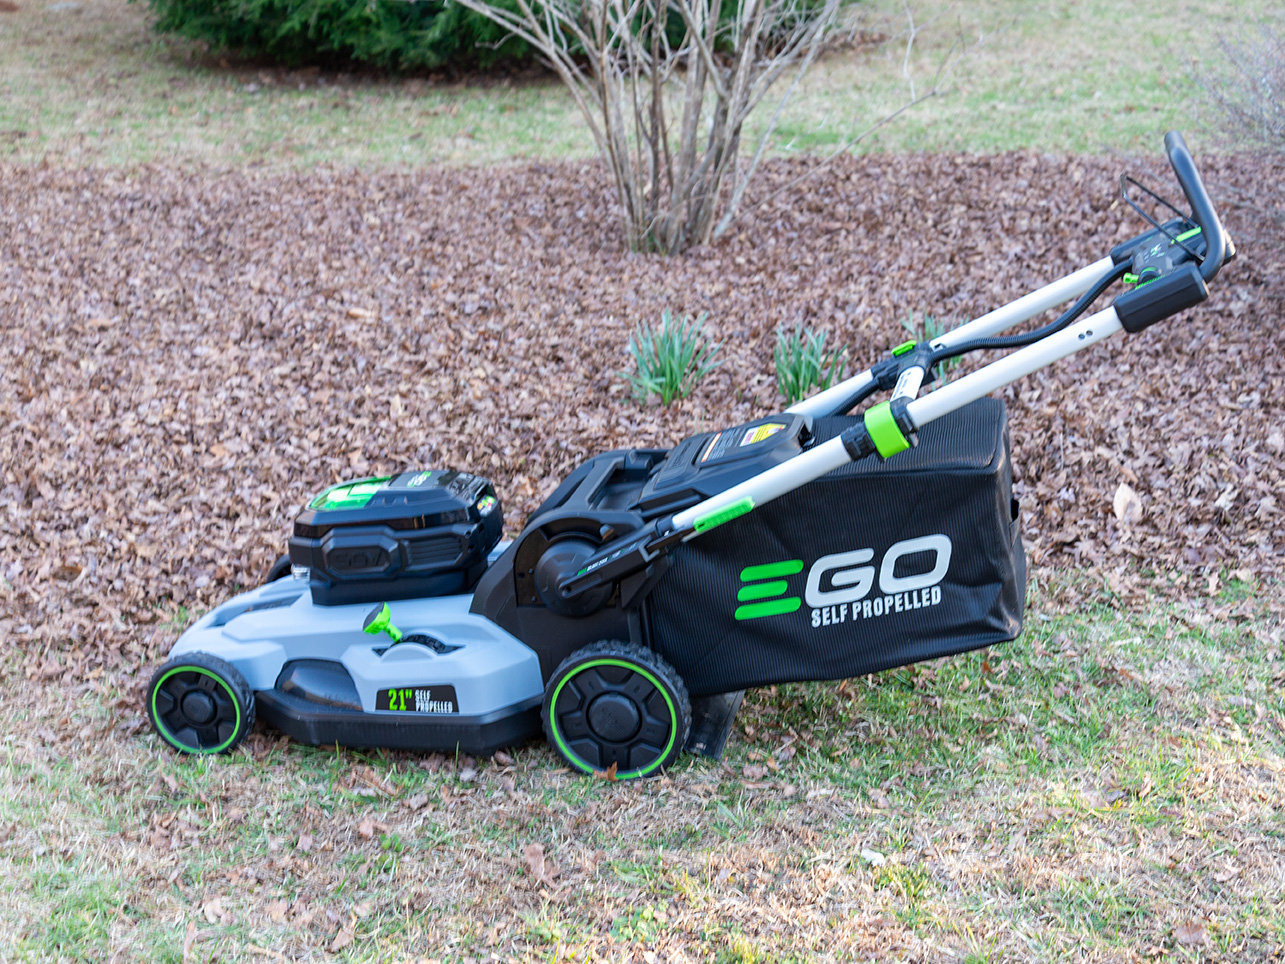 ego power lawn mower review